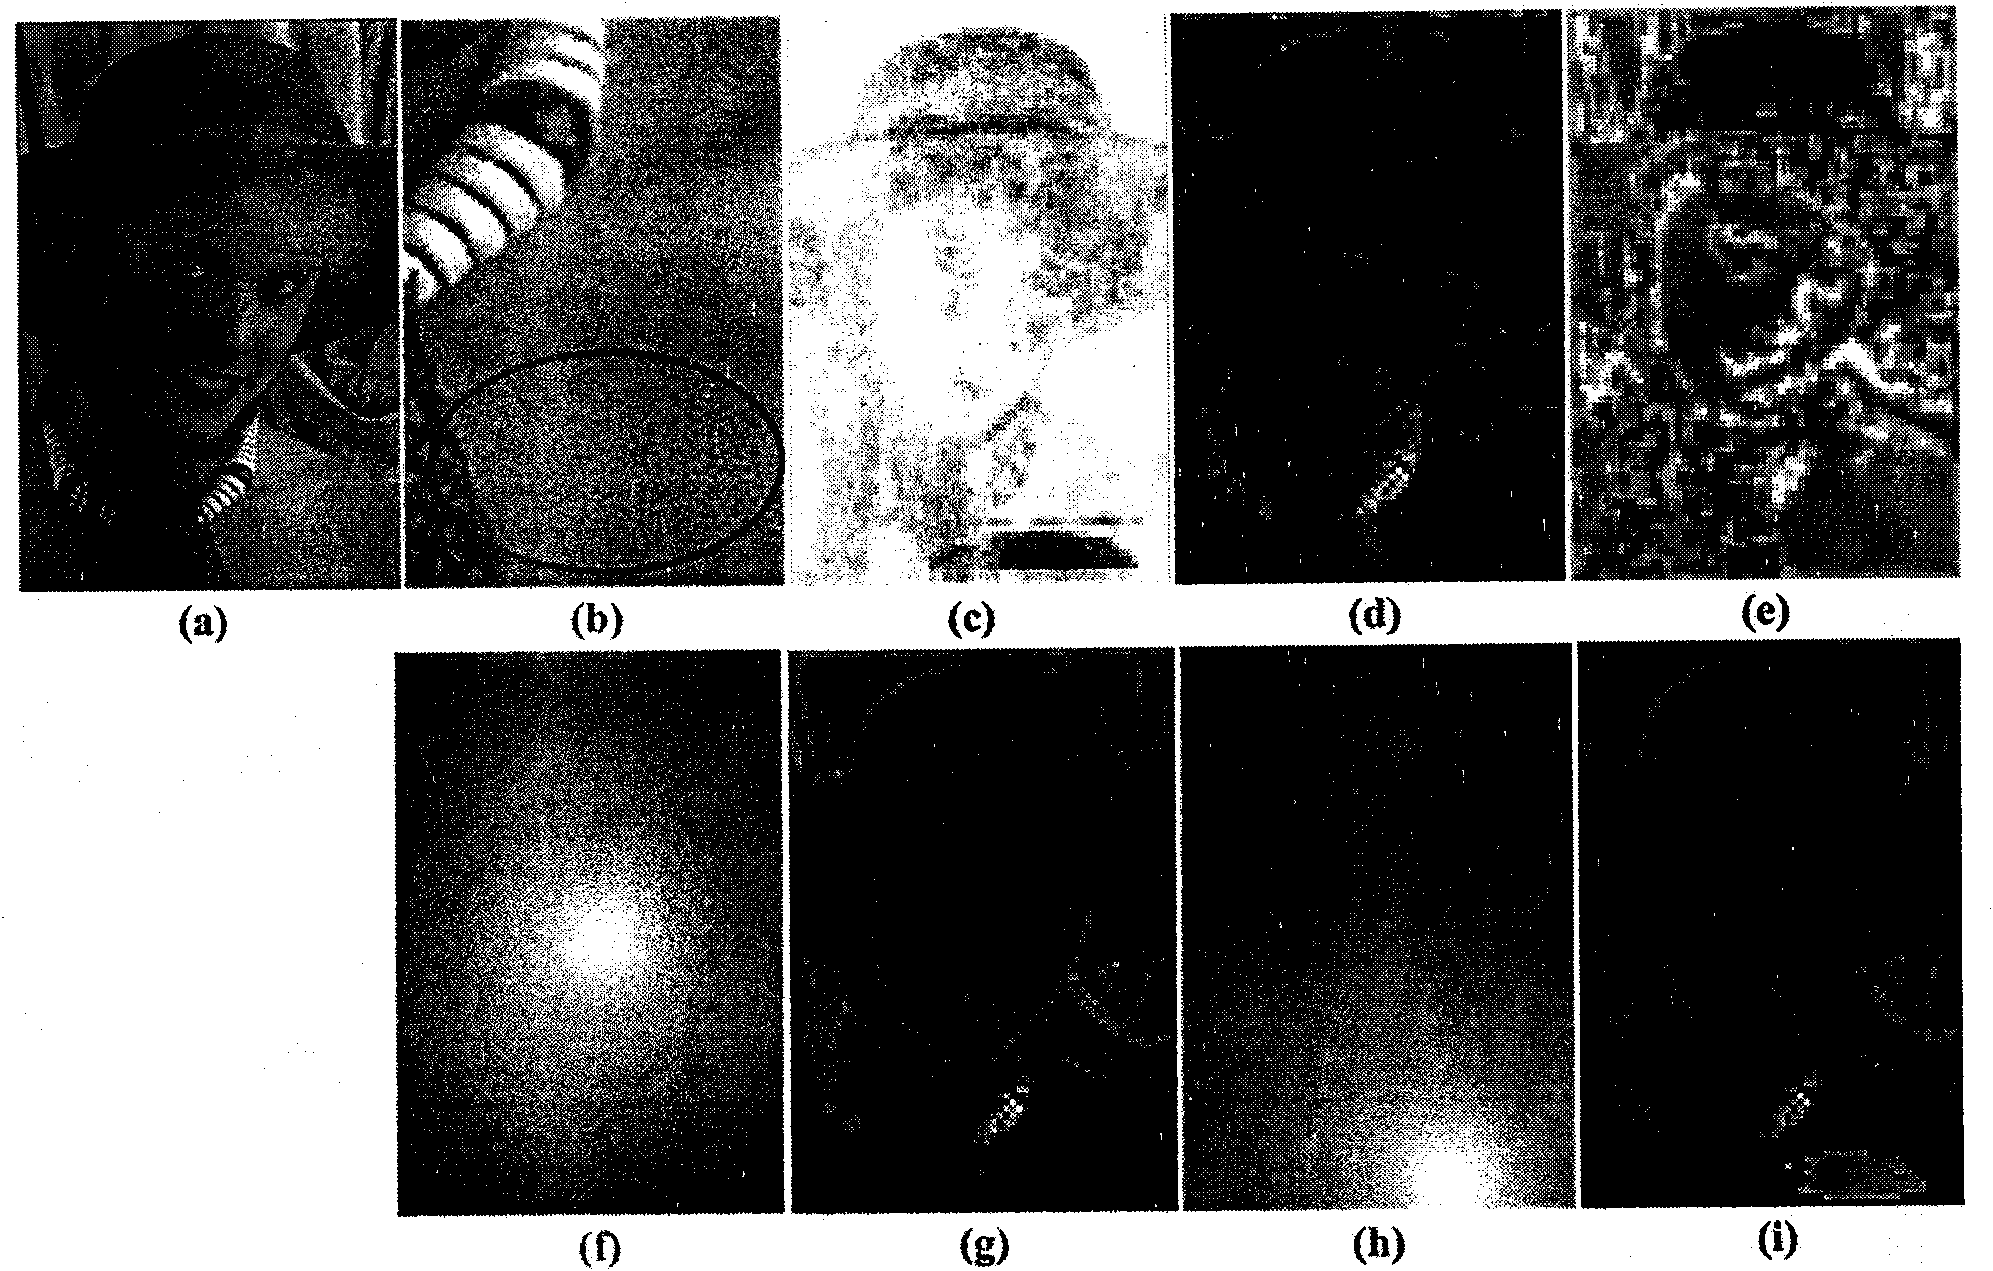 Method for evaluating objective quality of full-reference image